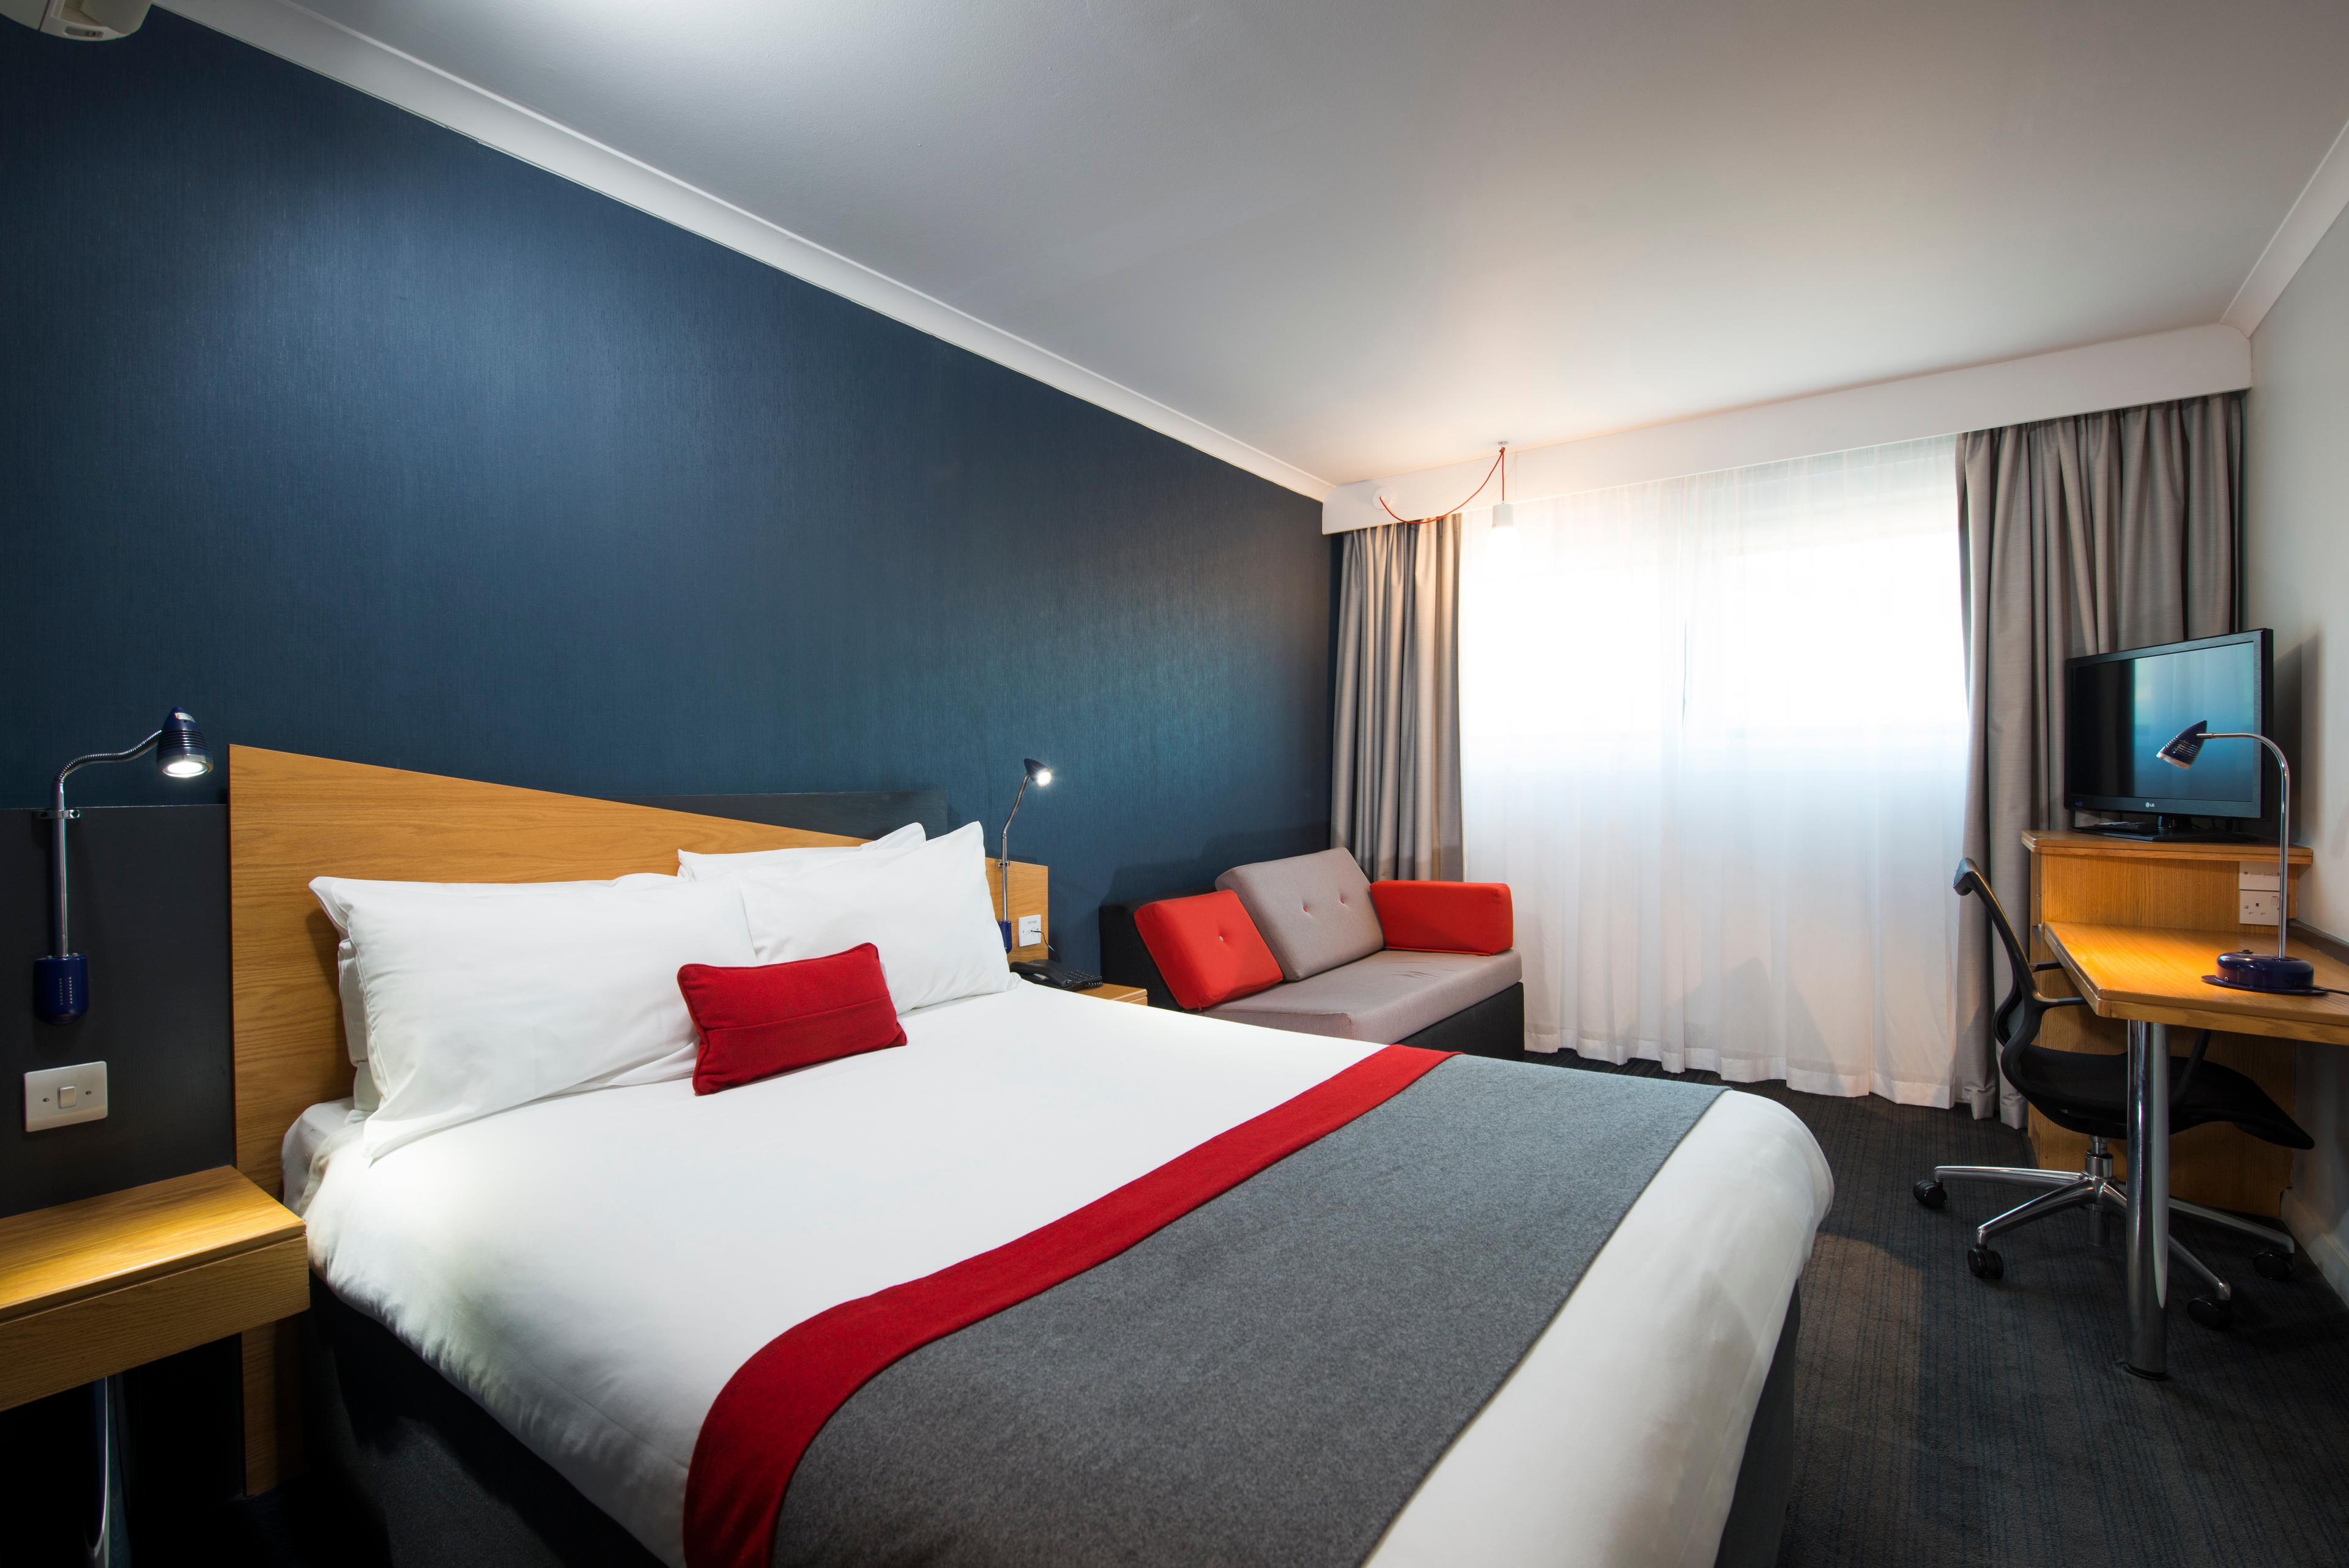 Enjoy air-conditioning and free Wi-Fi in our modern rooms